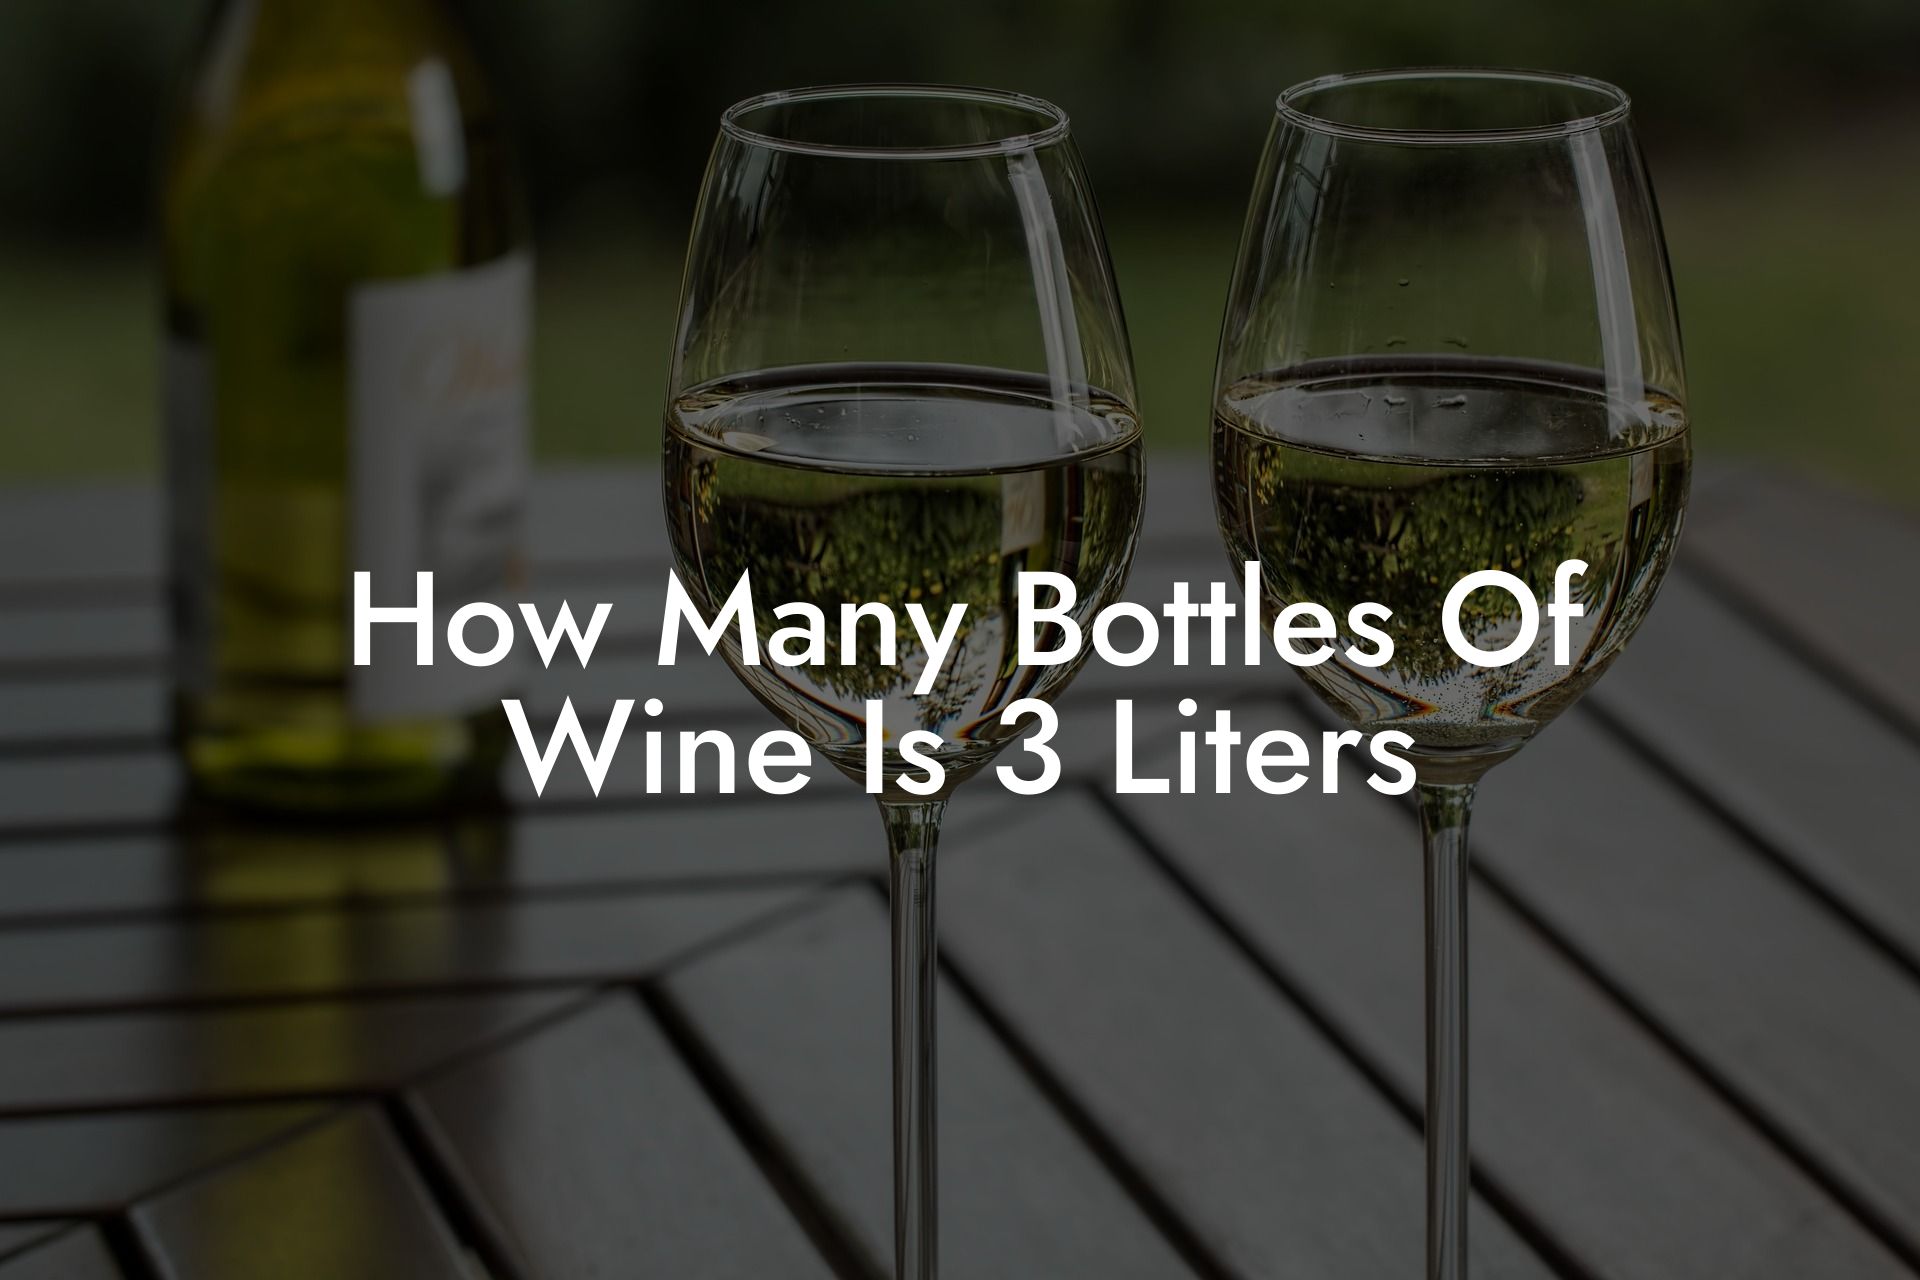 How Many Bottles Of Wine Is 3 Liters